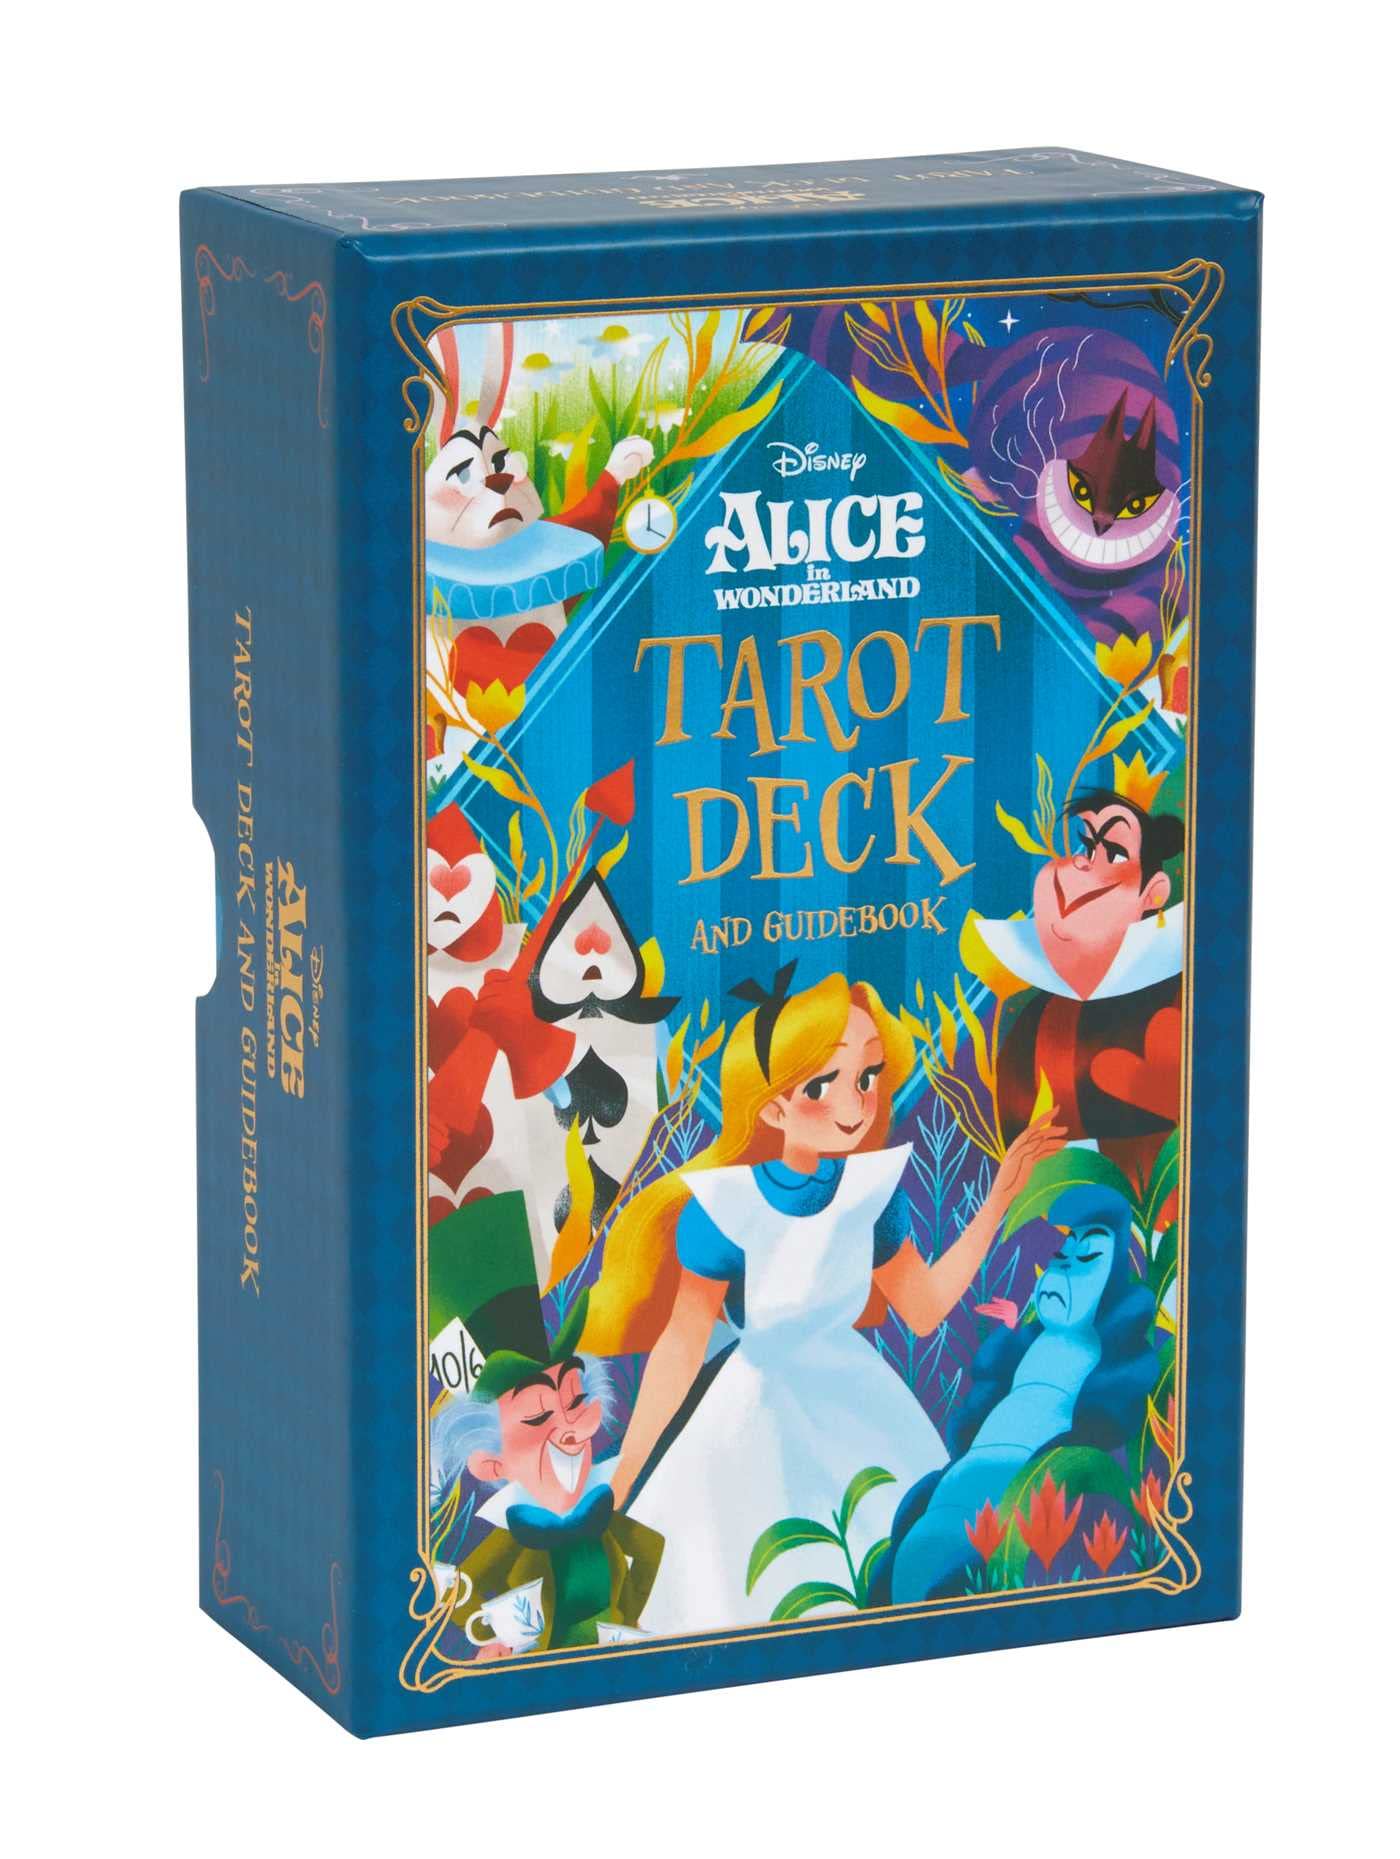 Alice in Wonderland Tarot Deck and Guidebook (CLEARANCE SALE)